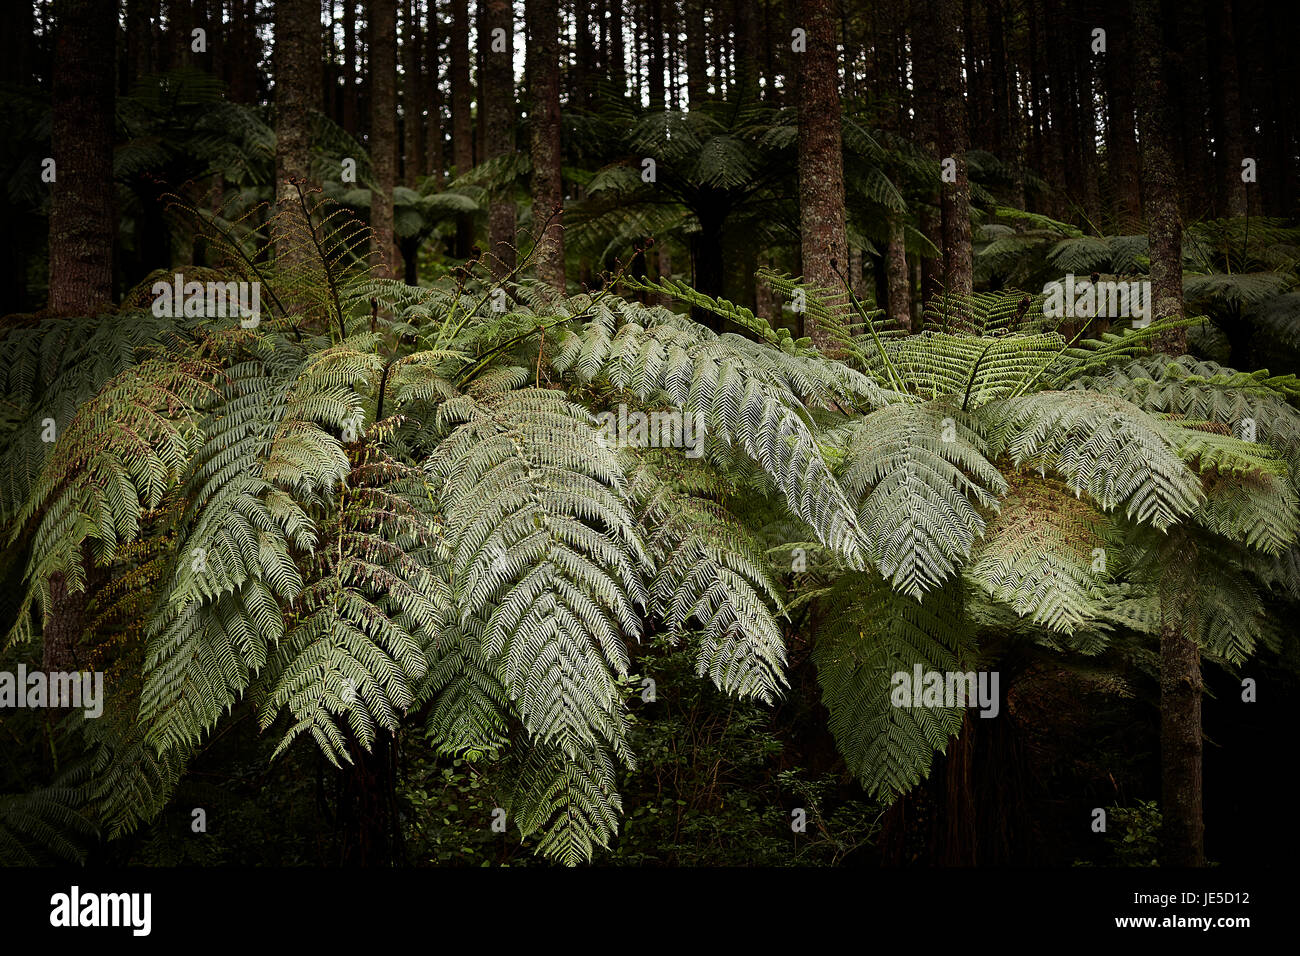 Ferns under forresrty canopy Stock Photo